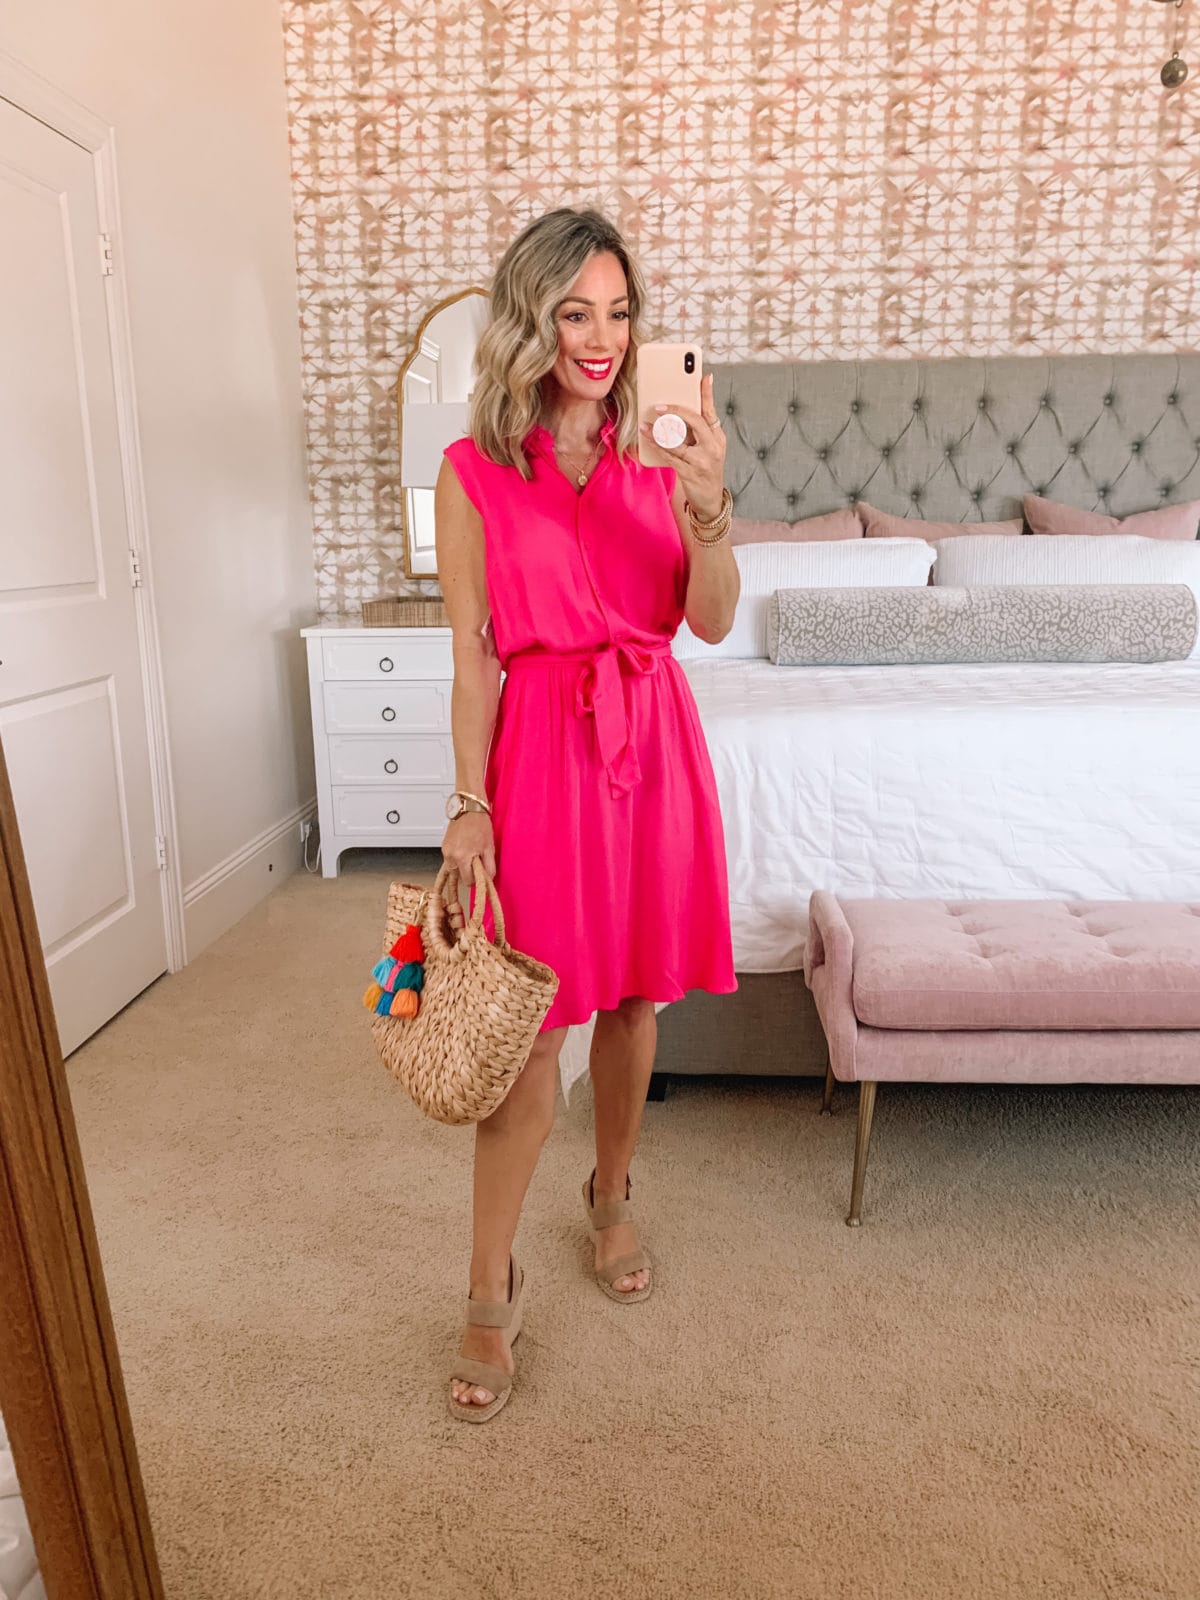 Amazon Fashion Faves, Sleeveless Pink Dress, Wedges and Woven Tote with Tassel 